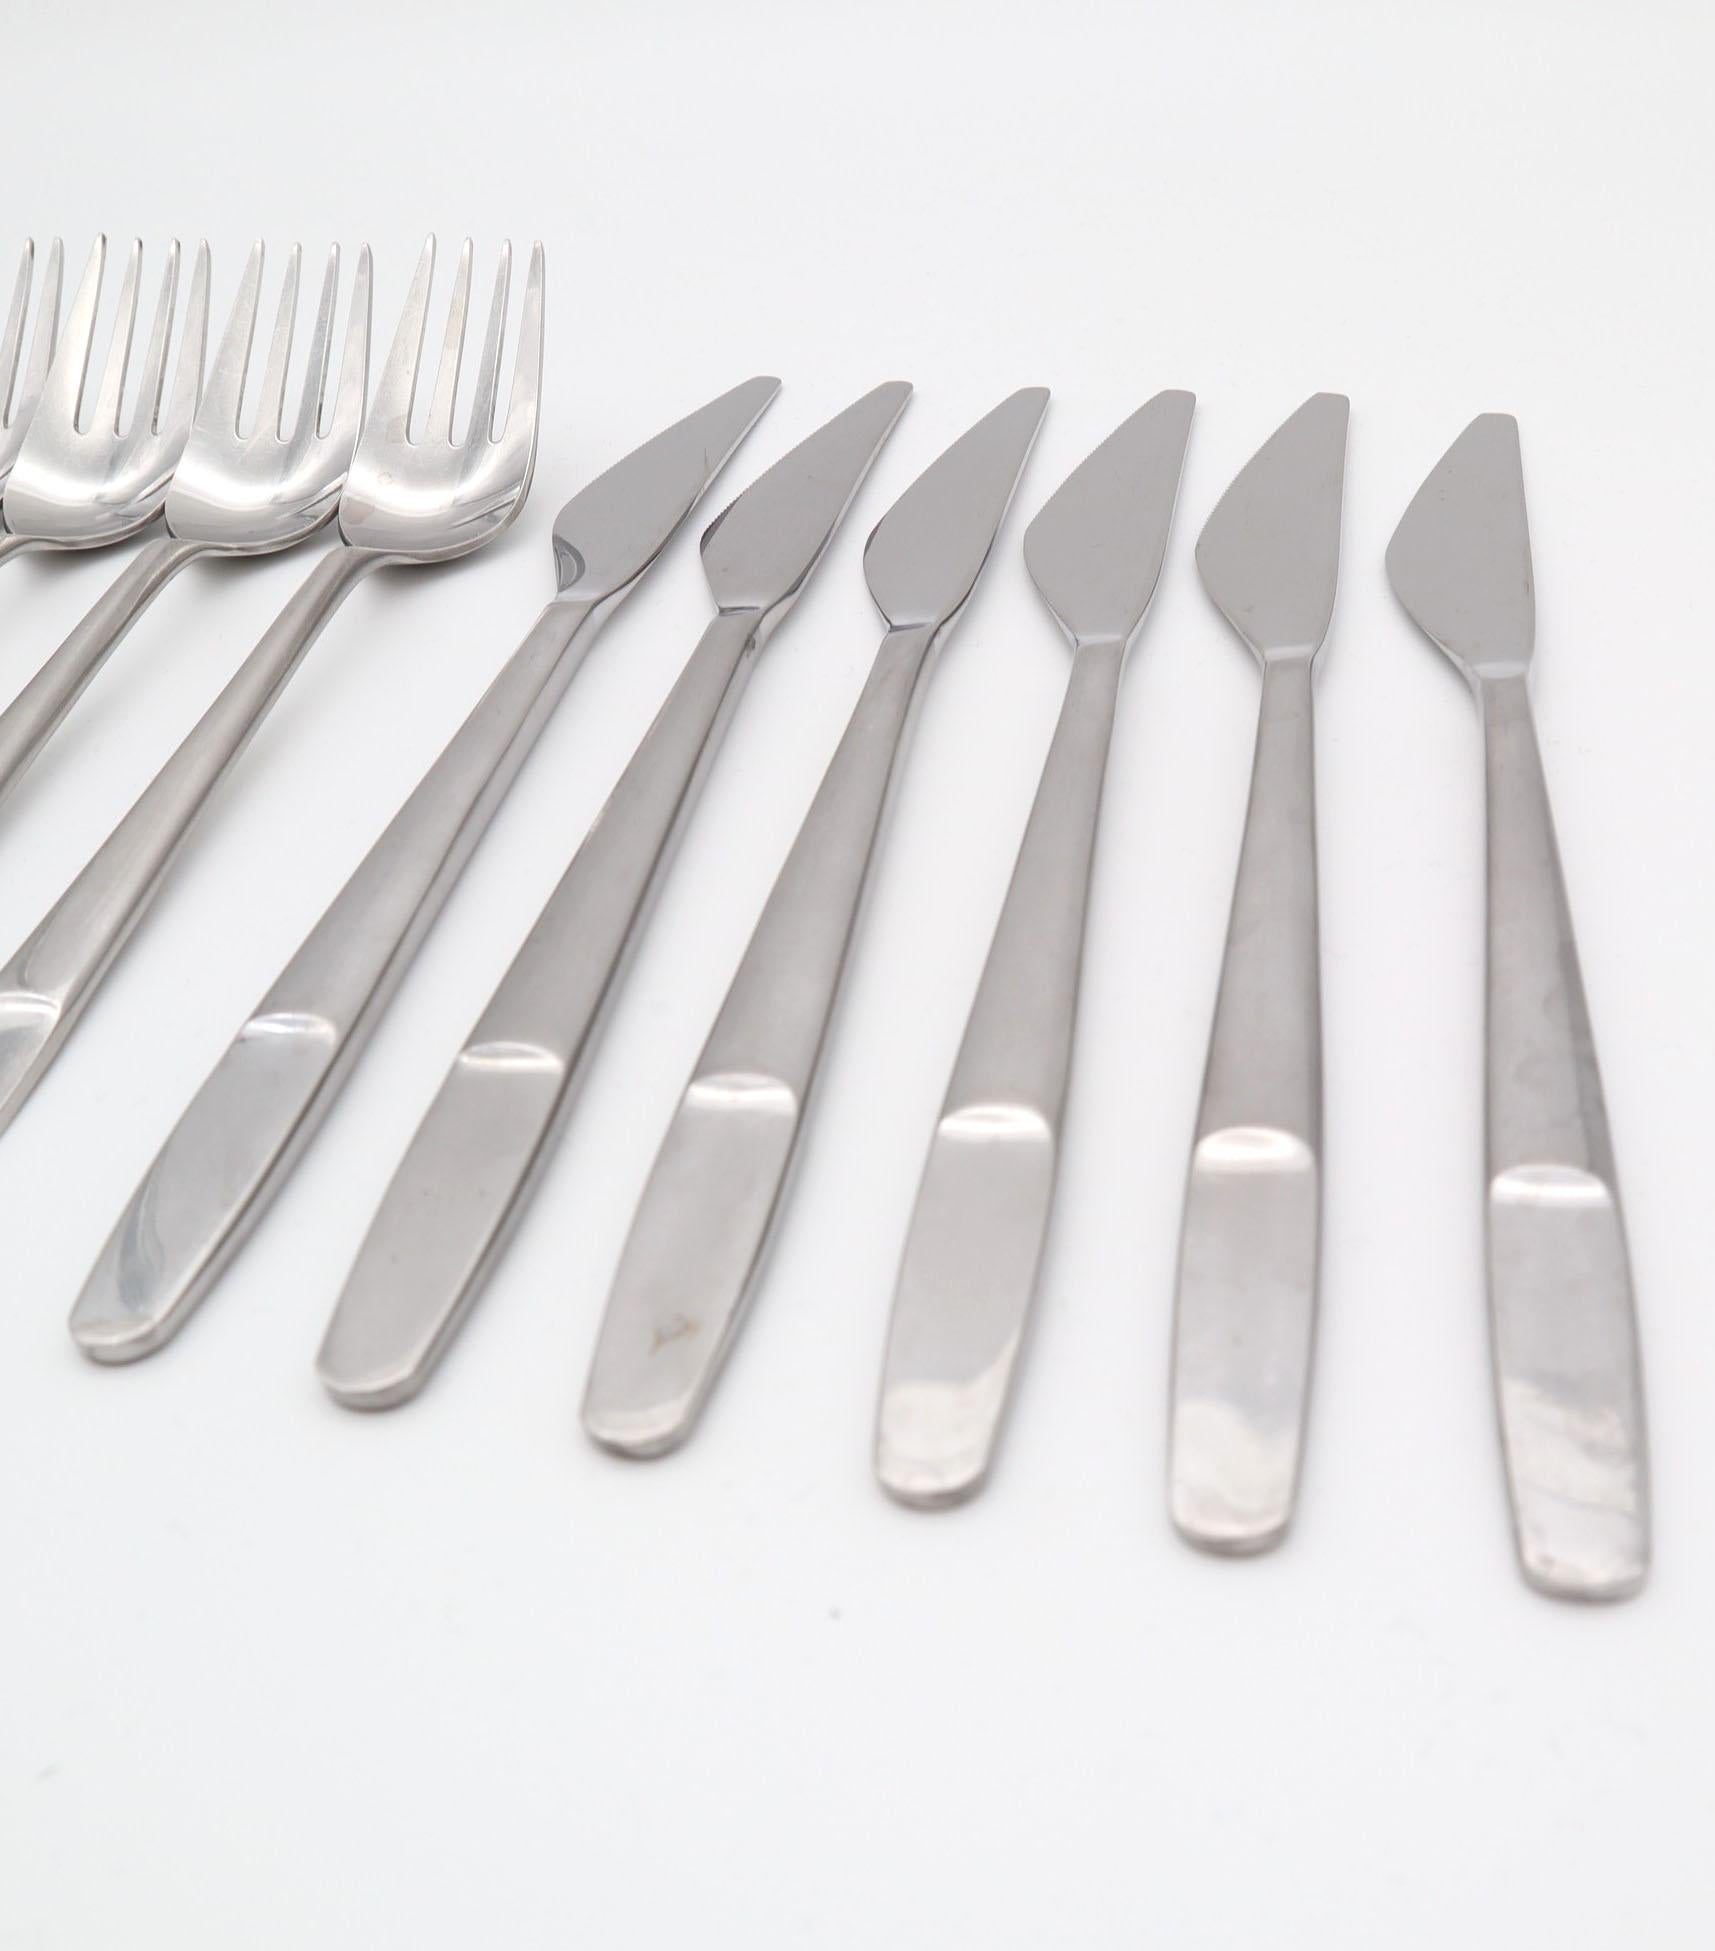 Mid-20th Century Cutlery Set by Helmut Alder for Amboss Model 2070, 32 Pieces, 1960s For Sale